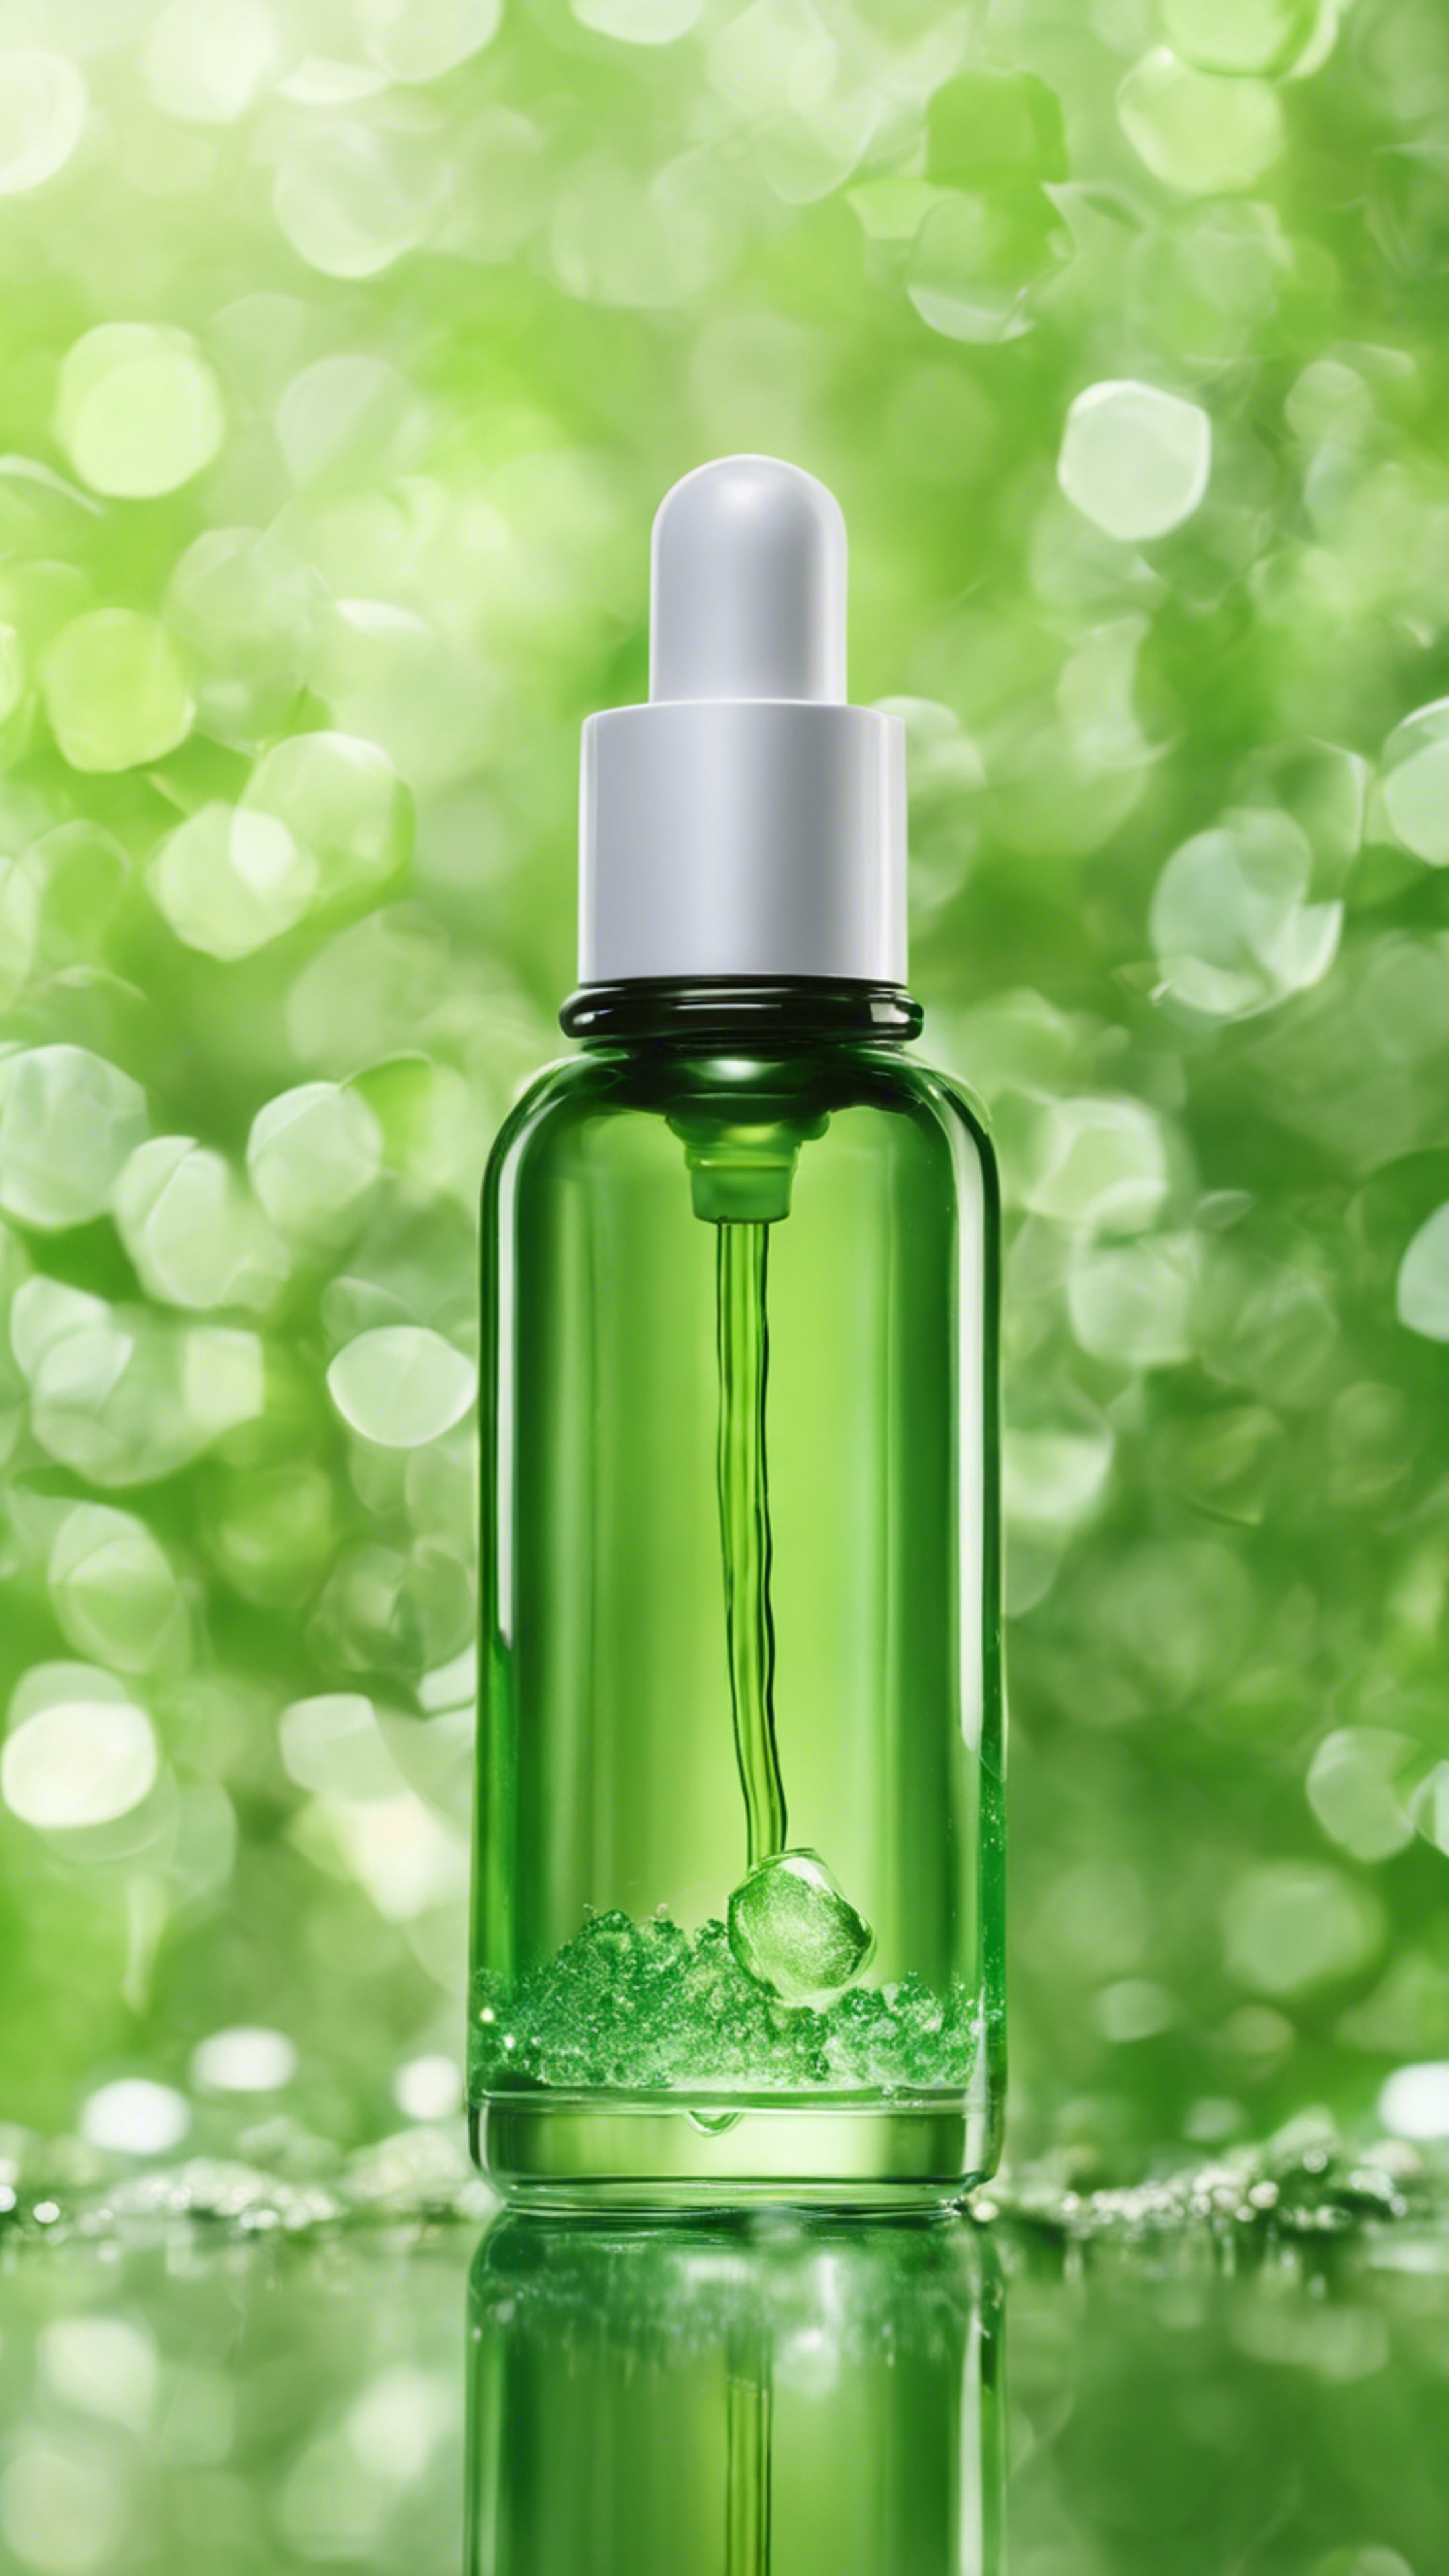 Green an eco-friendly cosmetics company's new hydrating face serum in a recyclable glass bottle. Tapet[04a9344189e843ad9259]